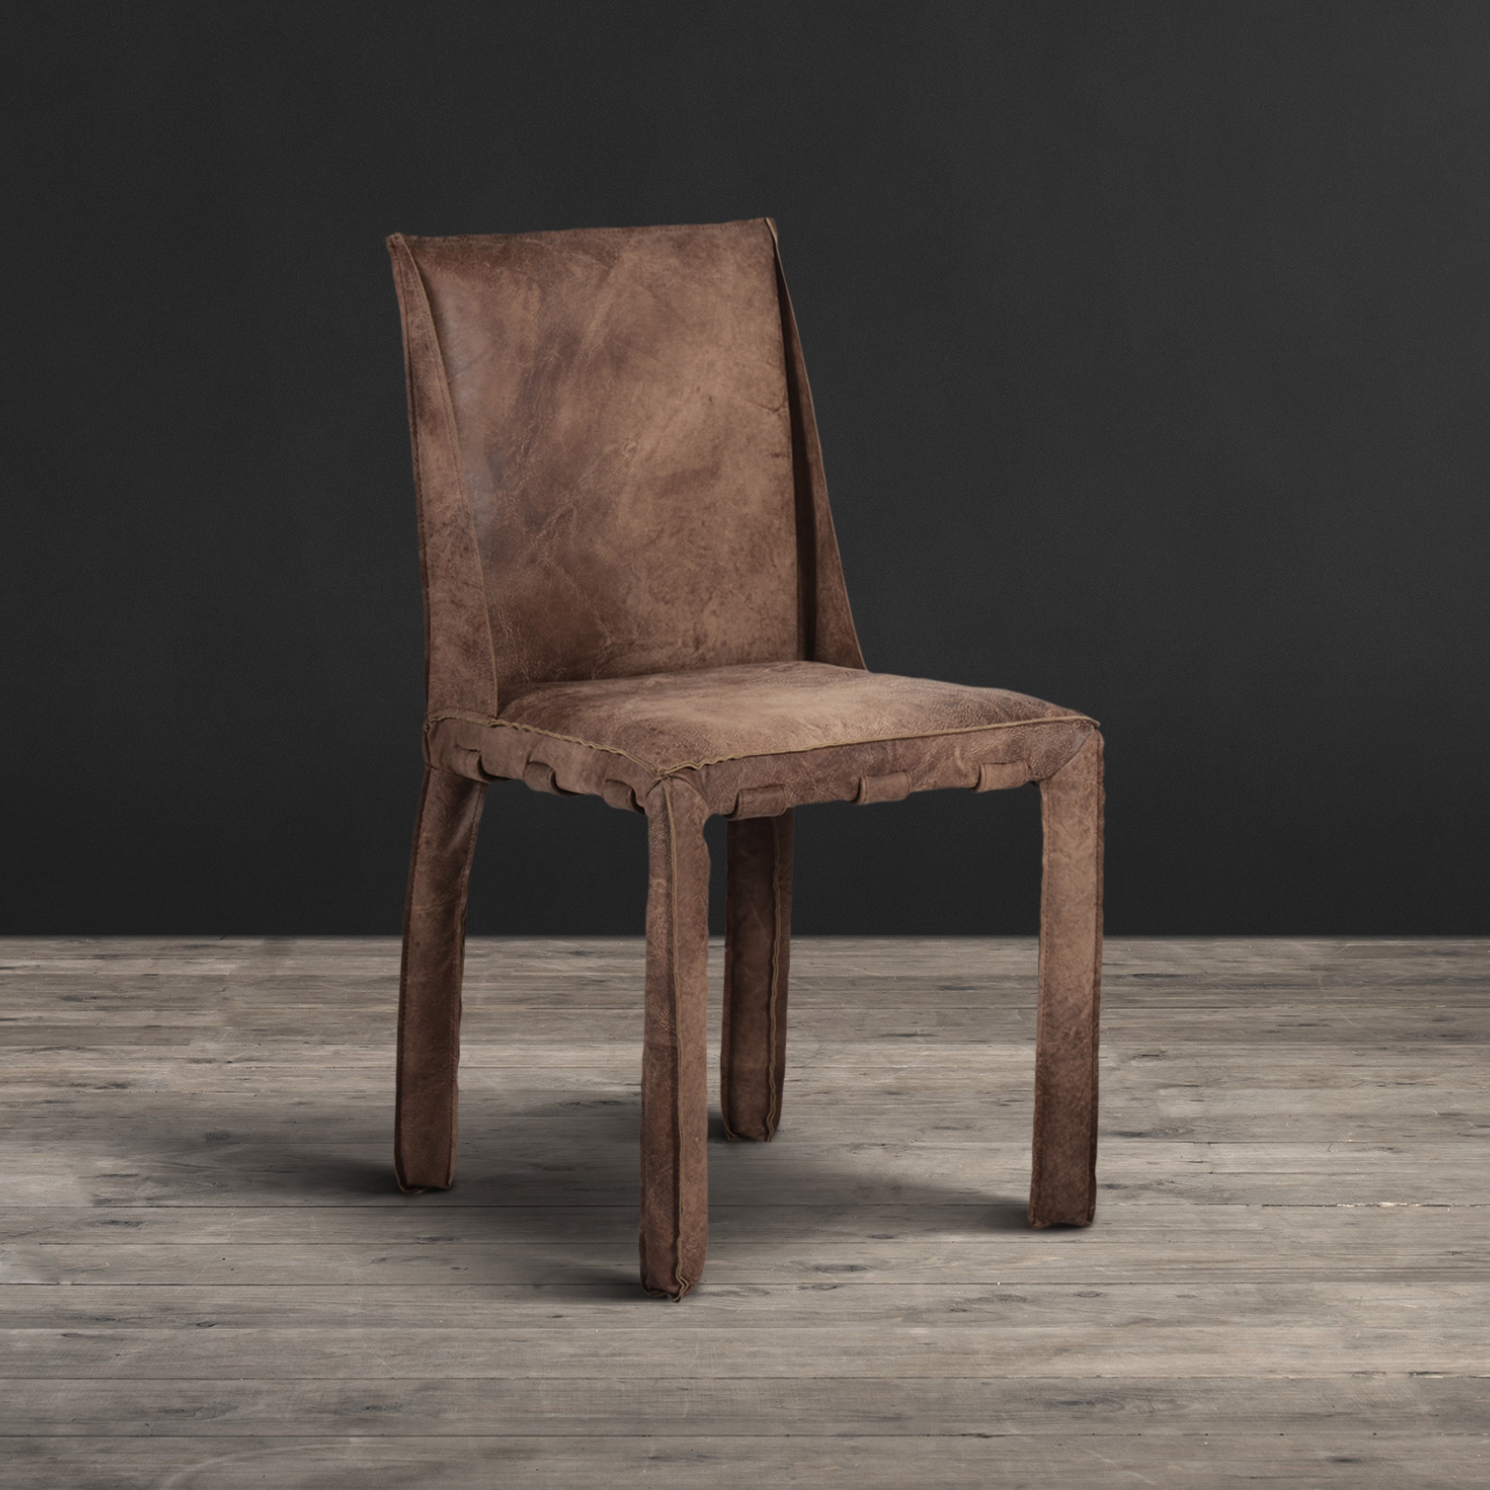 Swallow Dining Chair Scarecrow Brown Leather Outfitted Top To Bottom In Our Hand Finished